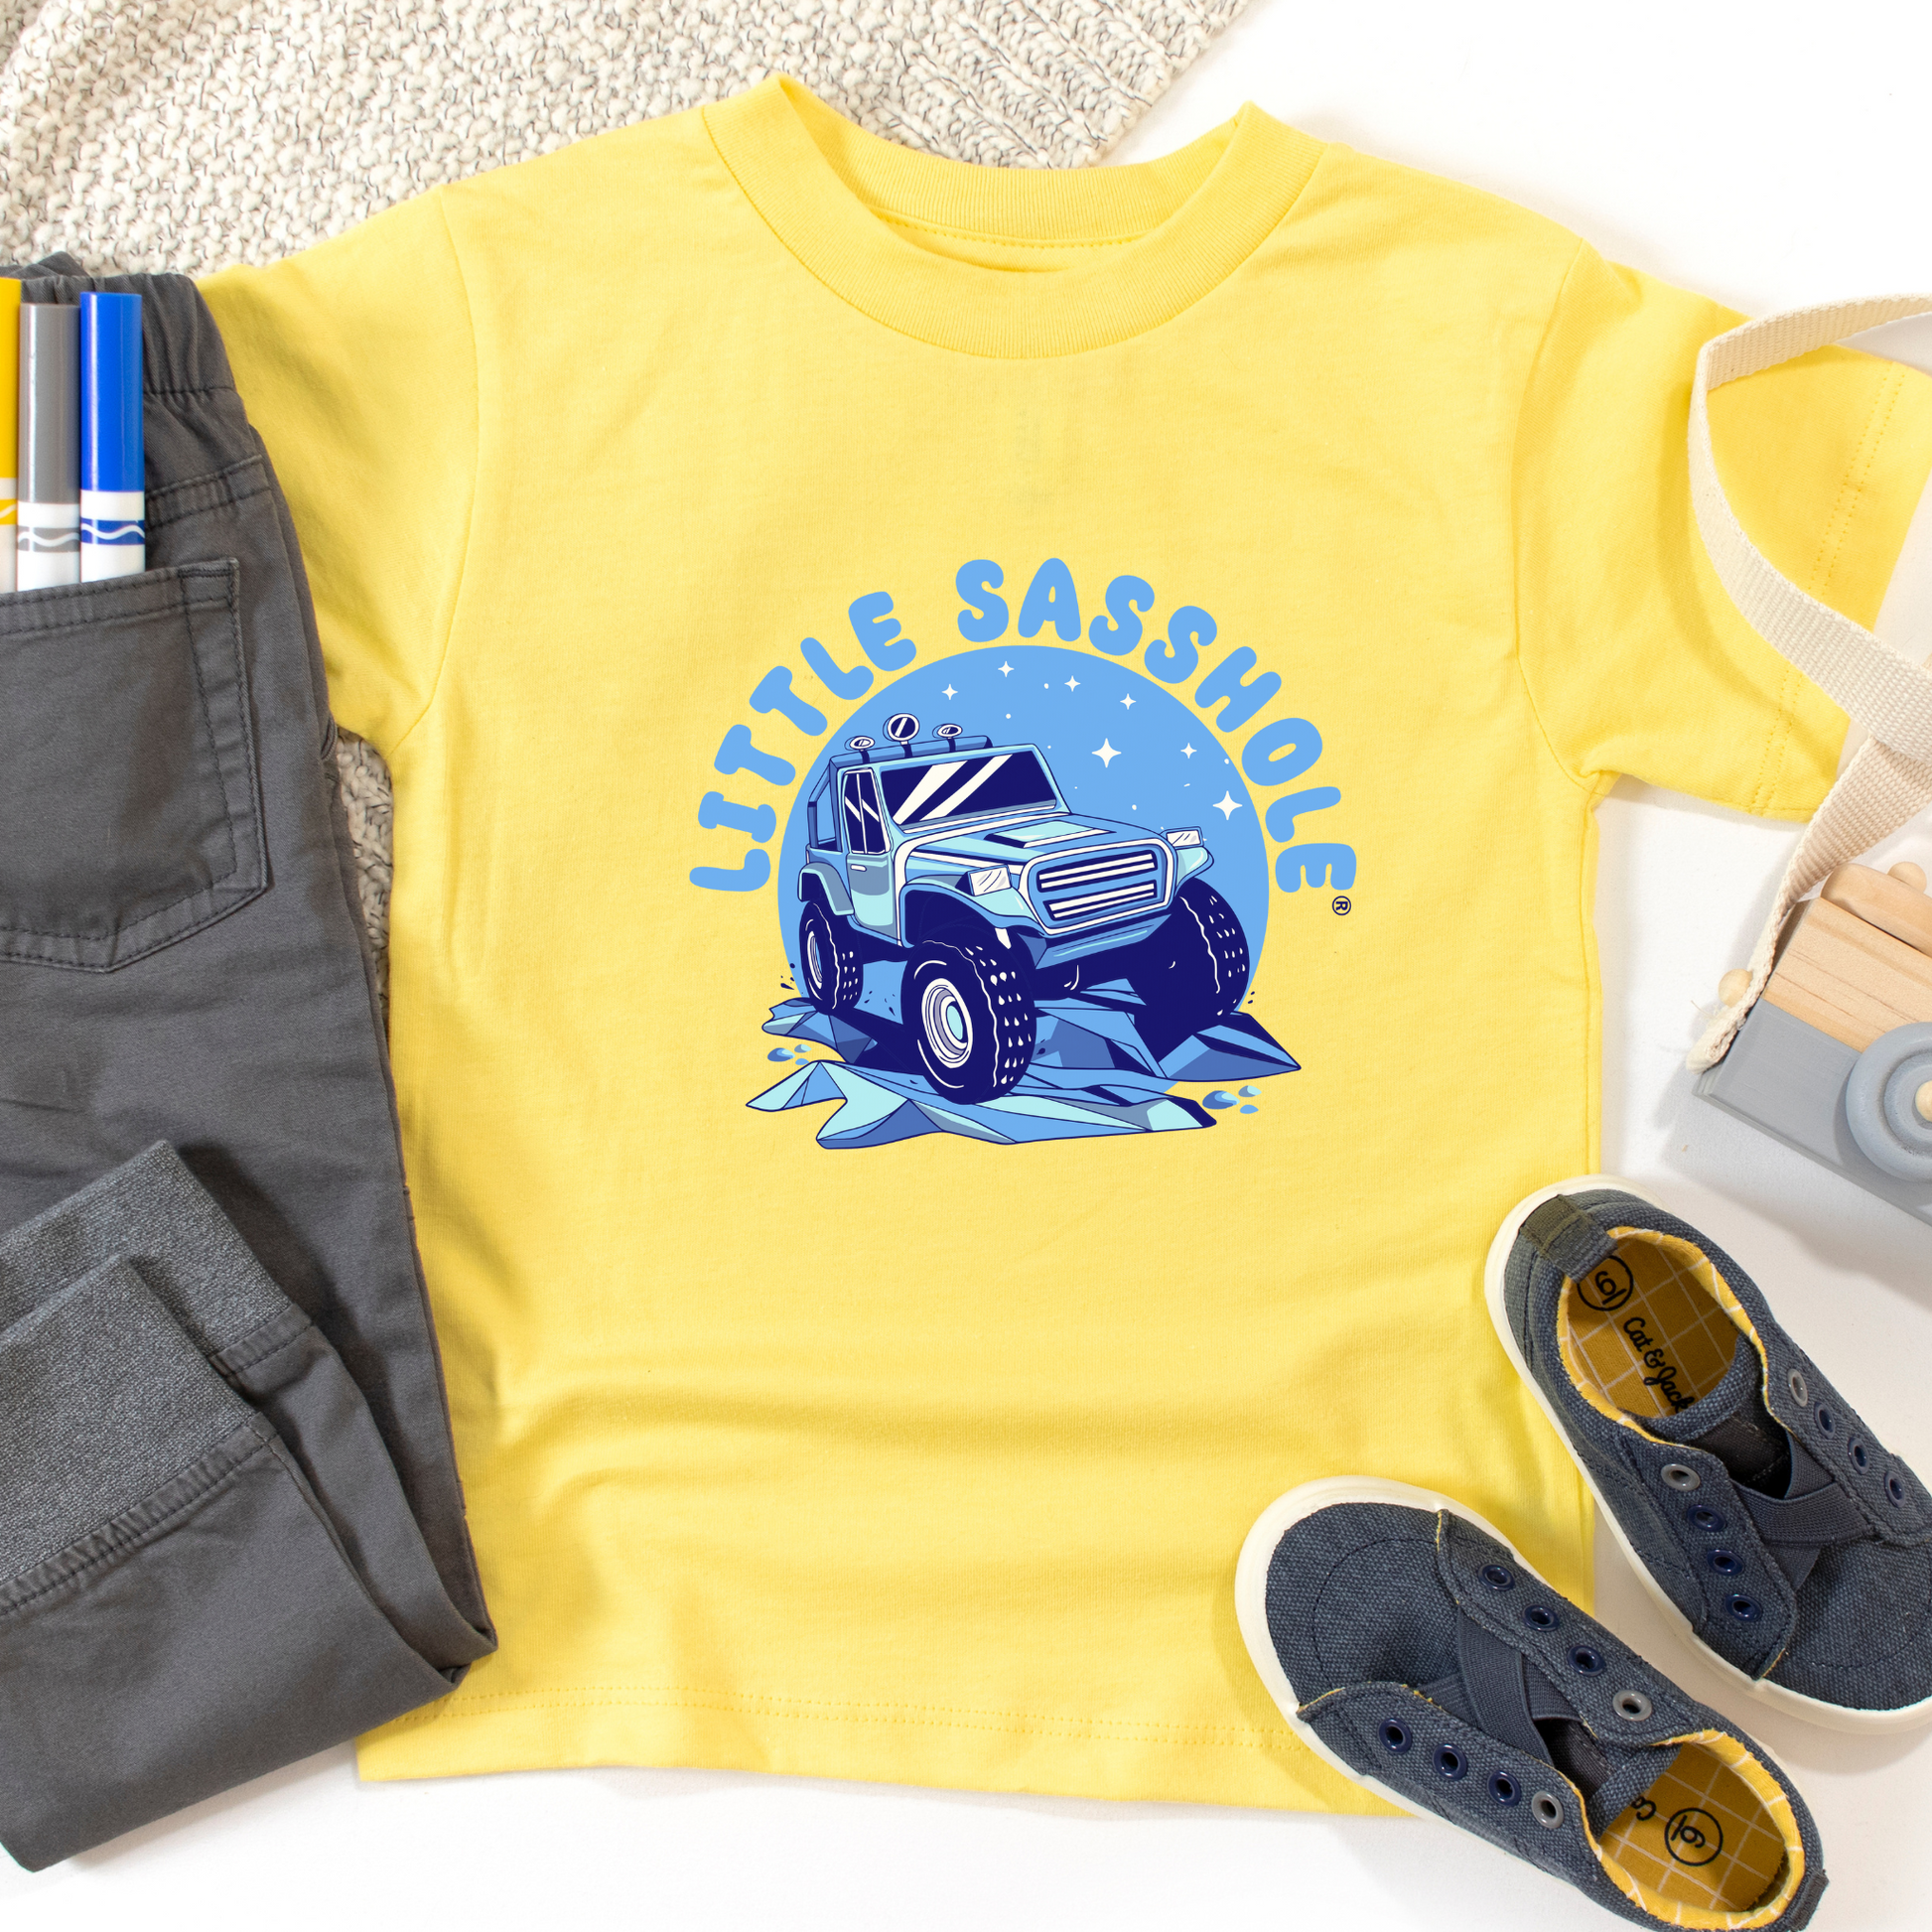 funny tshirts for kids yellow